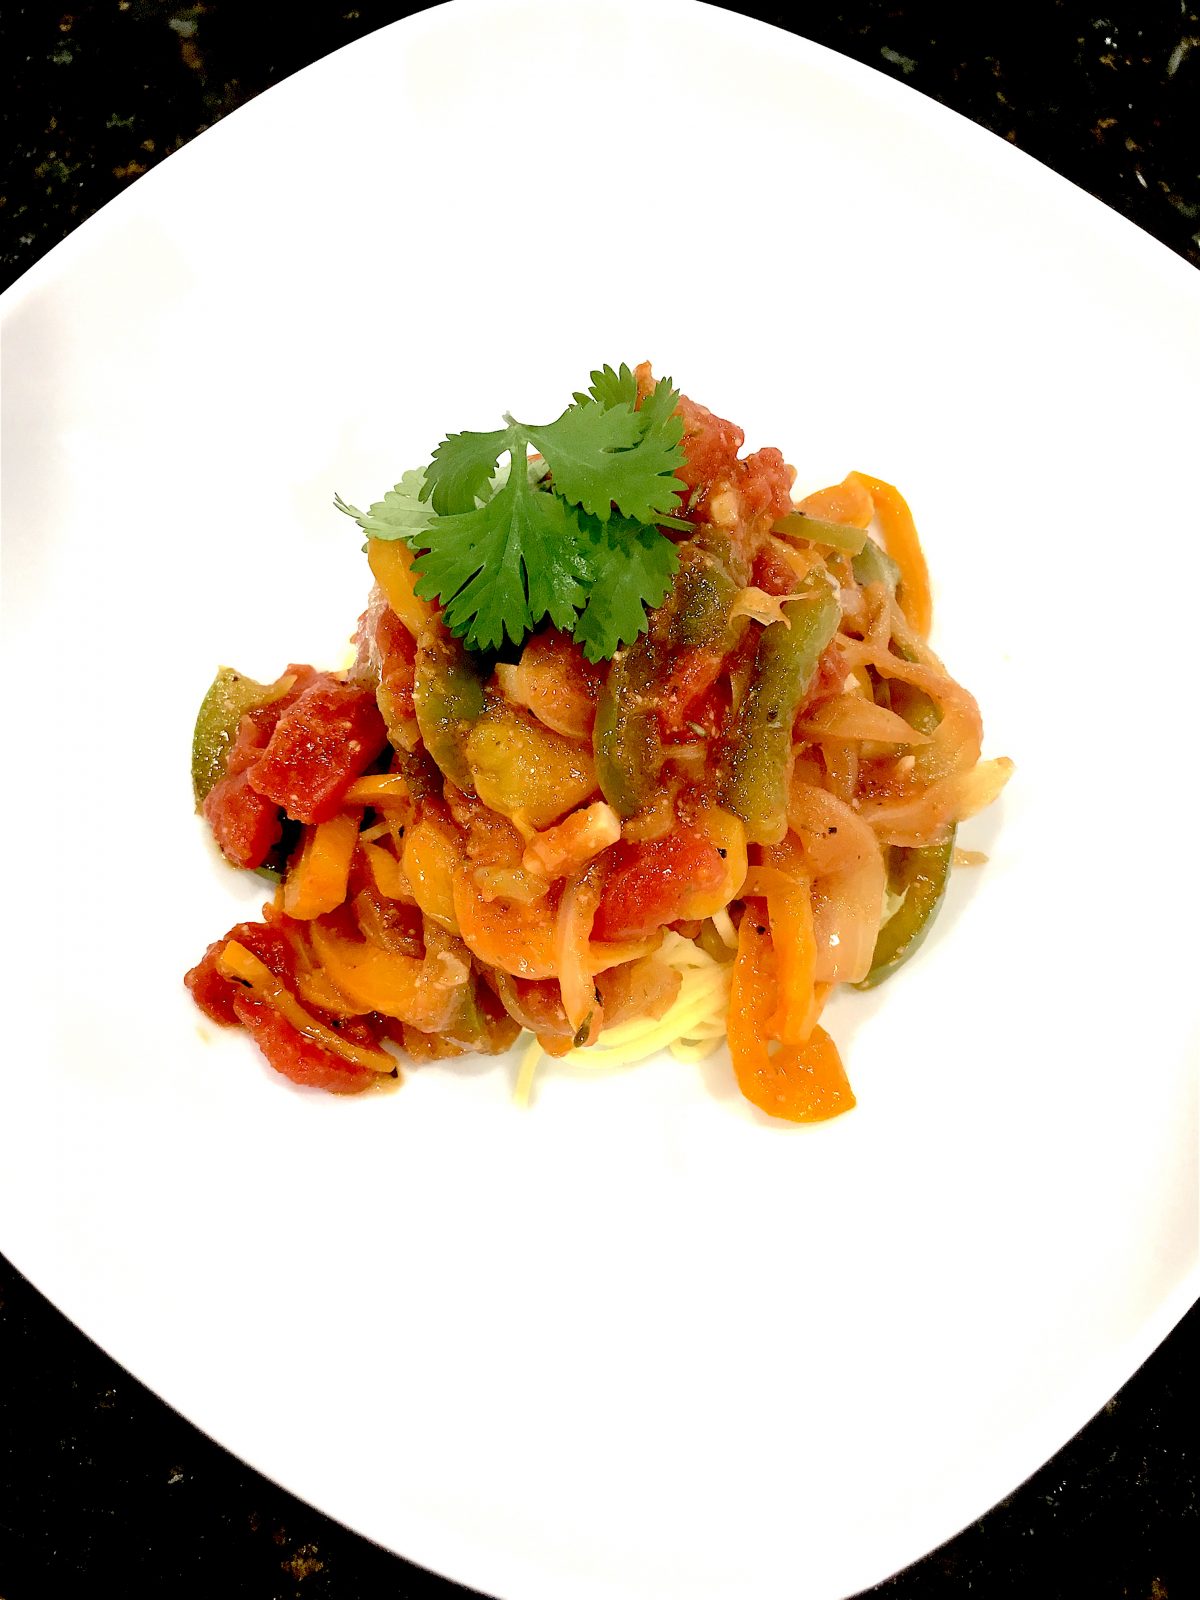 Quick and Easy Pepper and Onion Marinara Pasta Dish #recipes #quickmeal #vegetarian